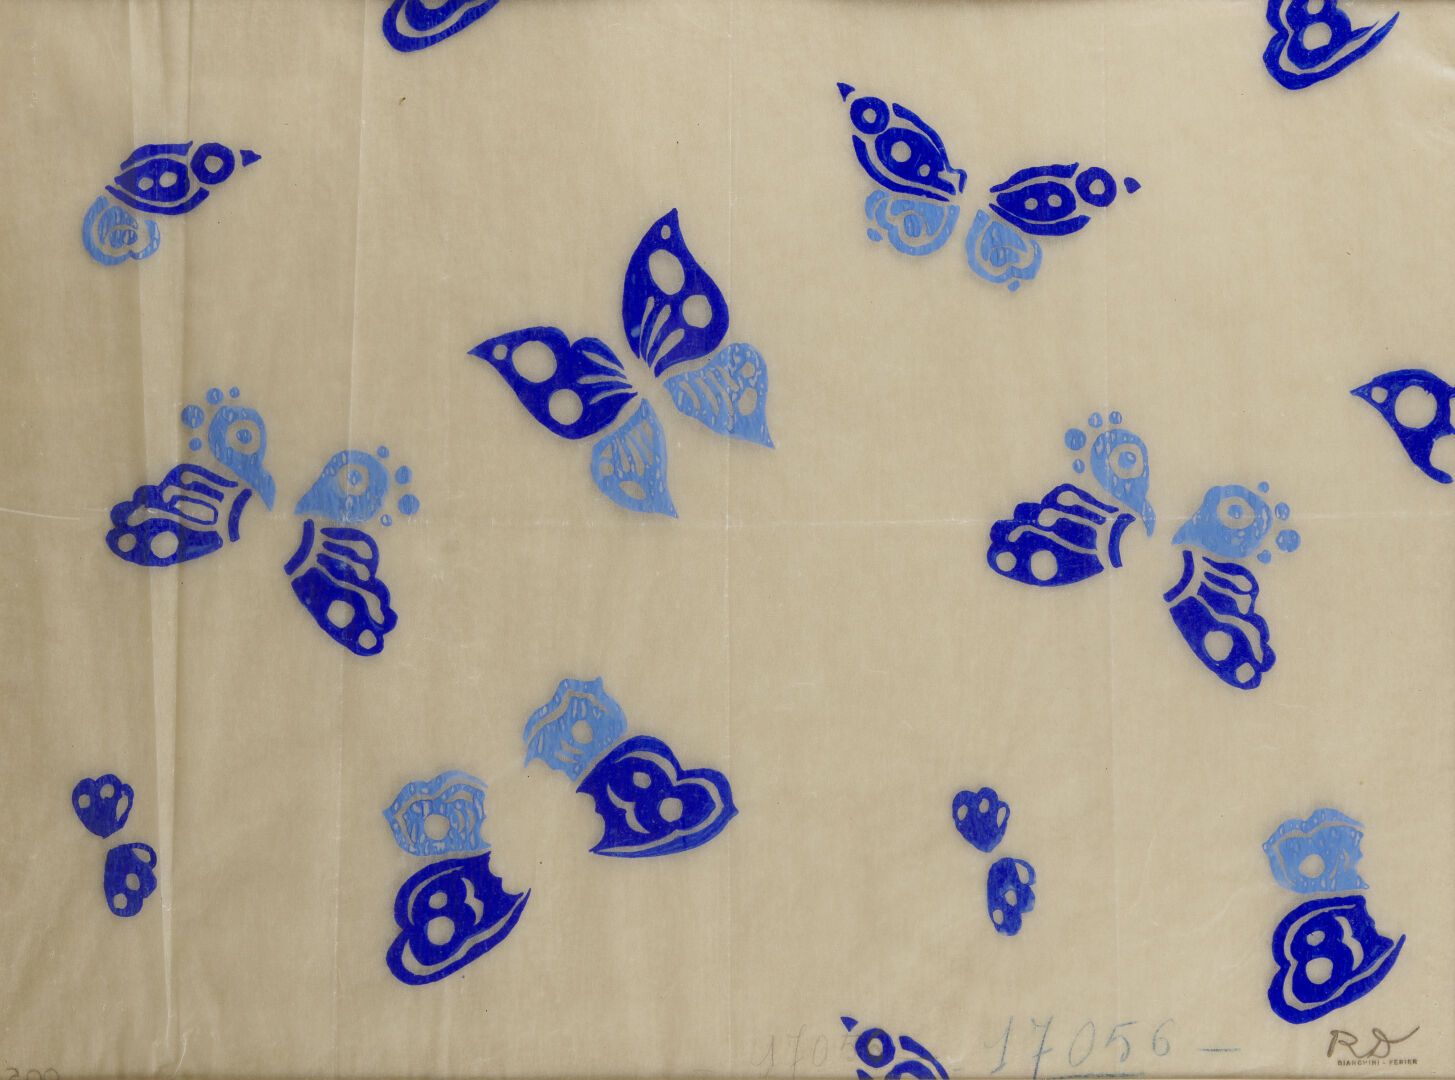 Null Raoul DUFY (1877 - 1953)

Butterflies

Gouache stencil on tracing paper, st&hellip;